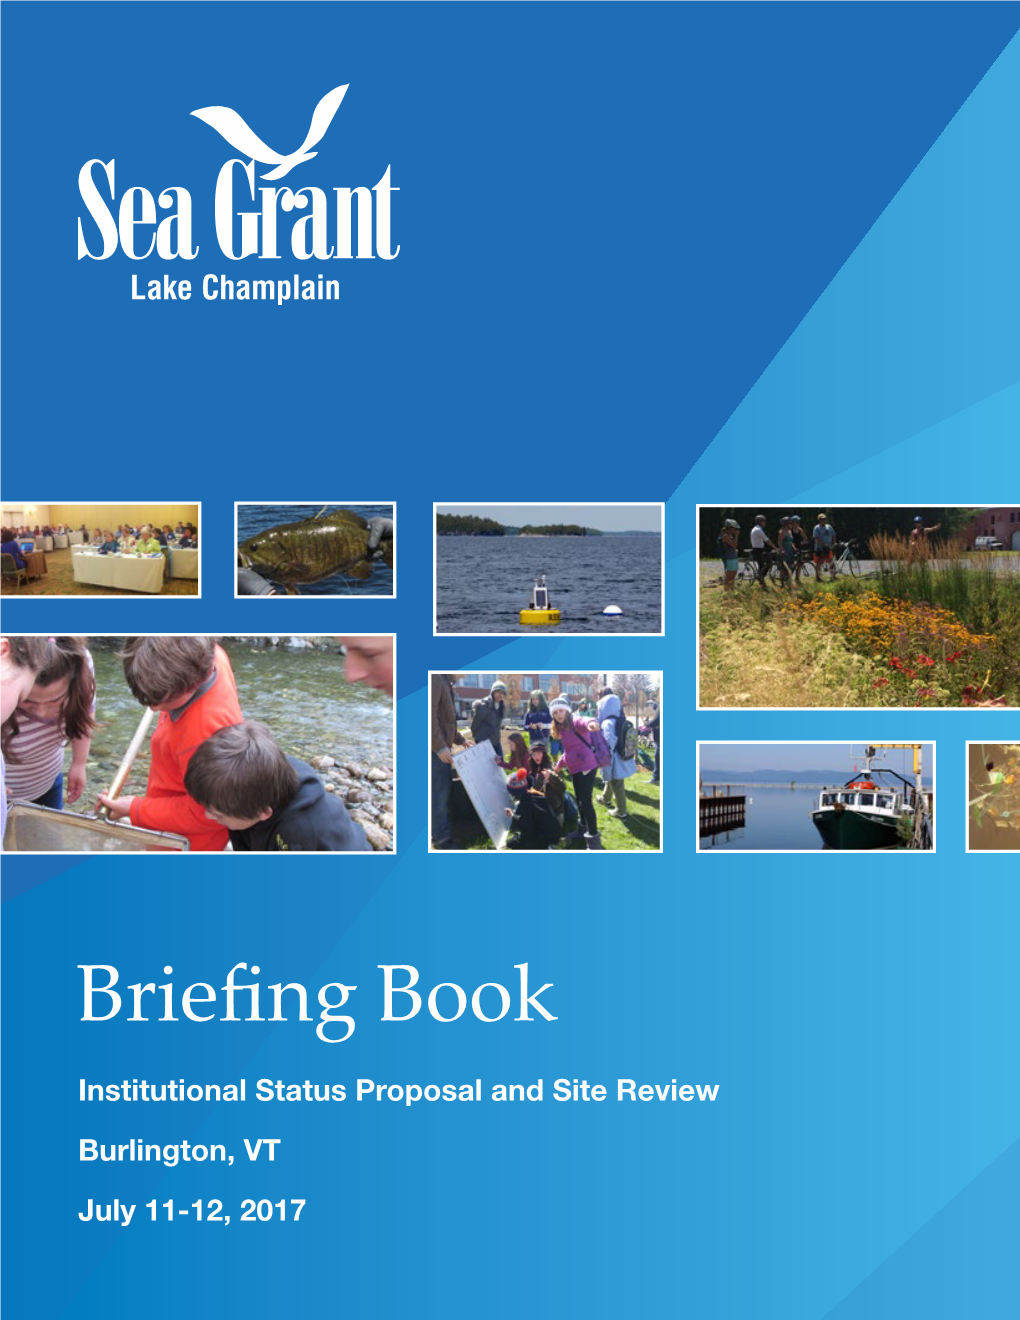 Briefing Book Institutional Status Proposal and Site Review Burlington, VT July 11-12, 2017